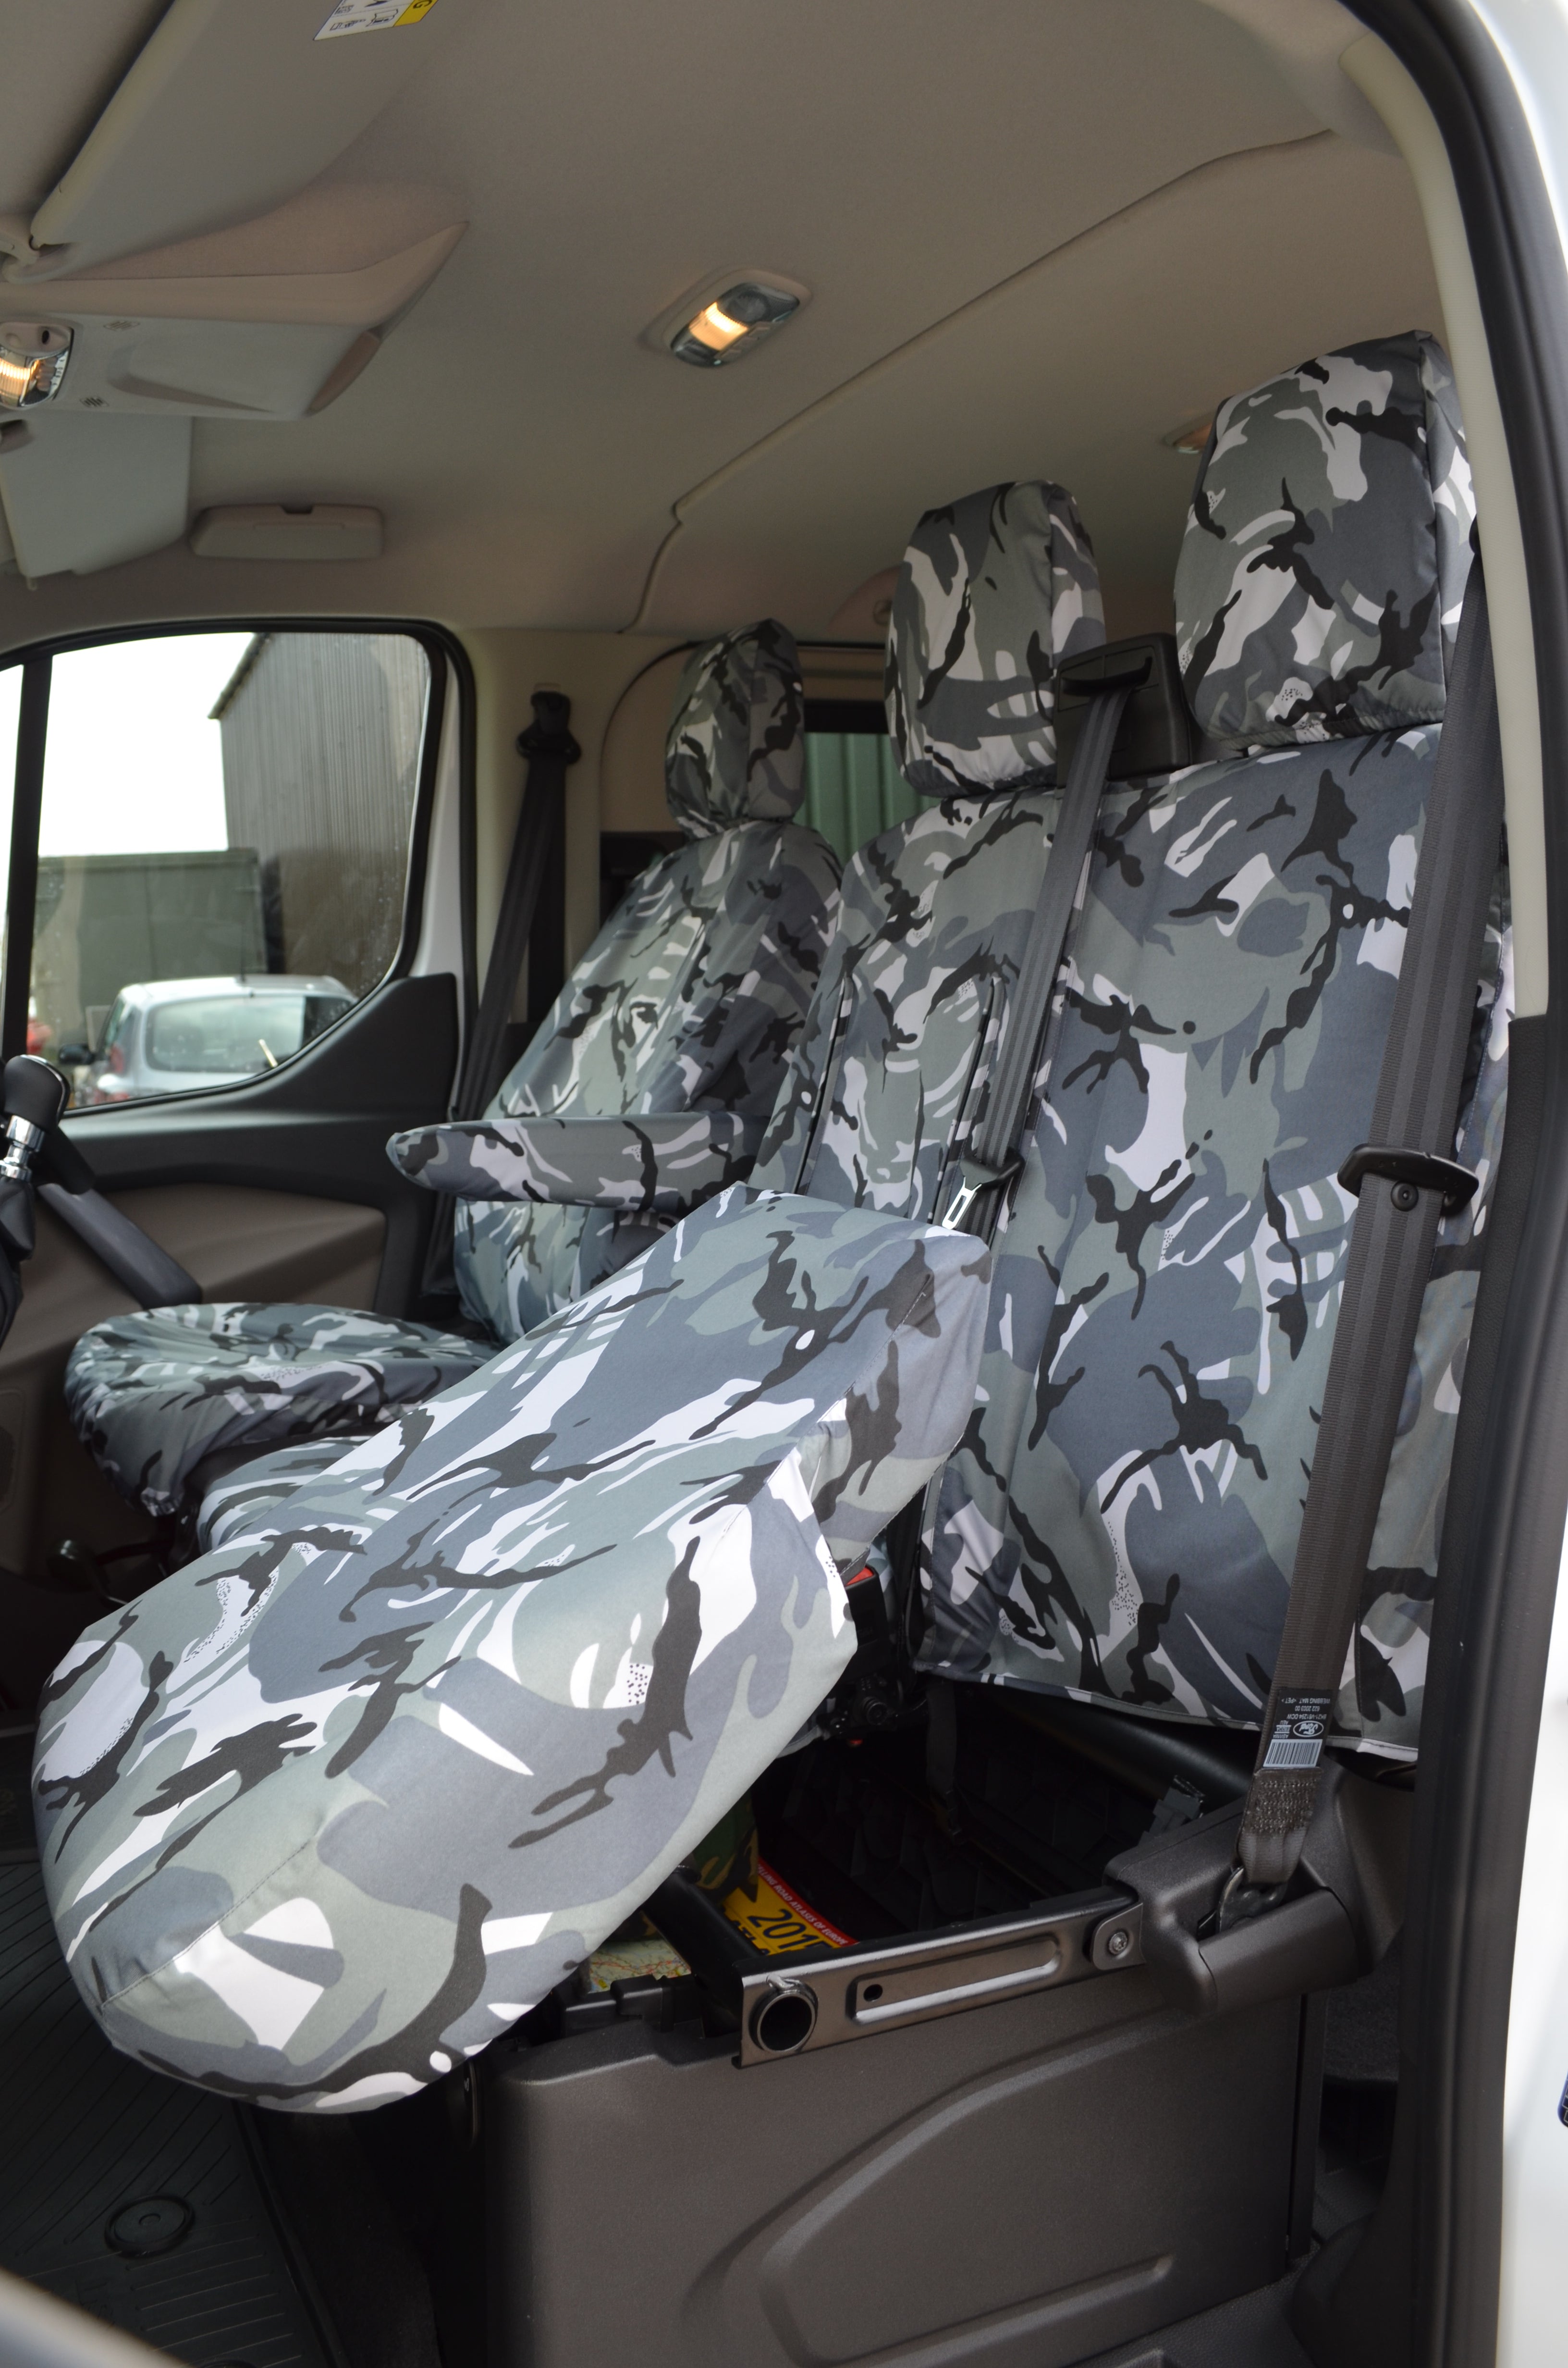 Maxus Deliver 9 2020+ Tailored Seat Covers